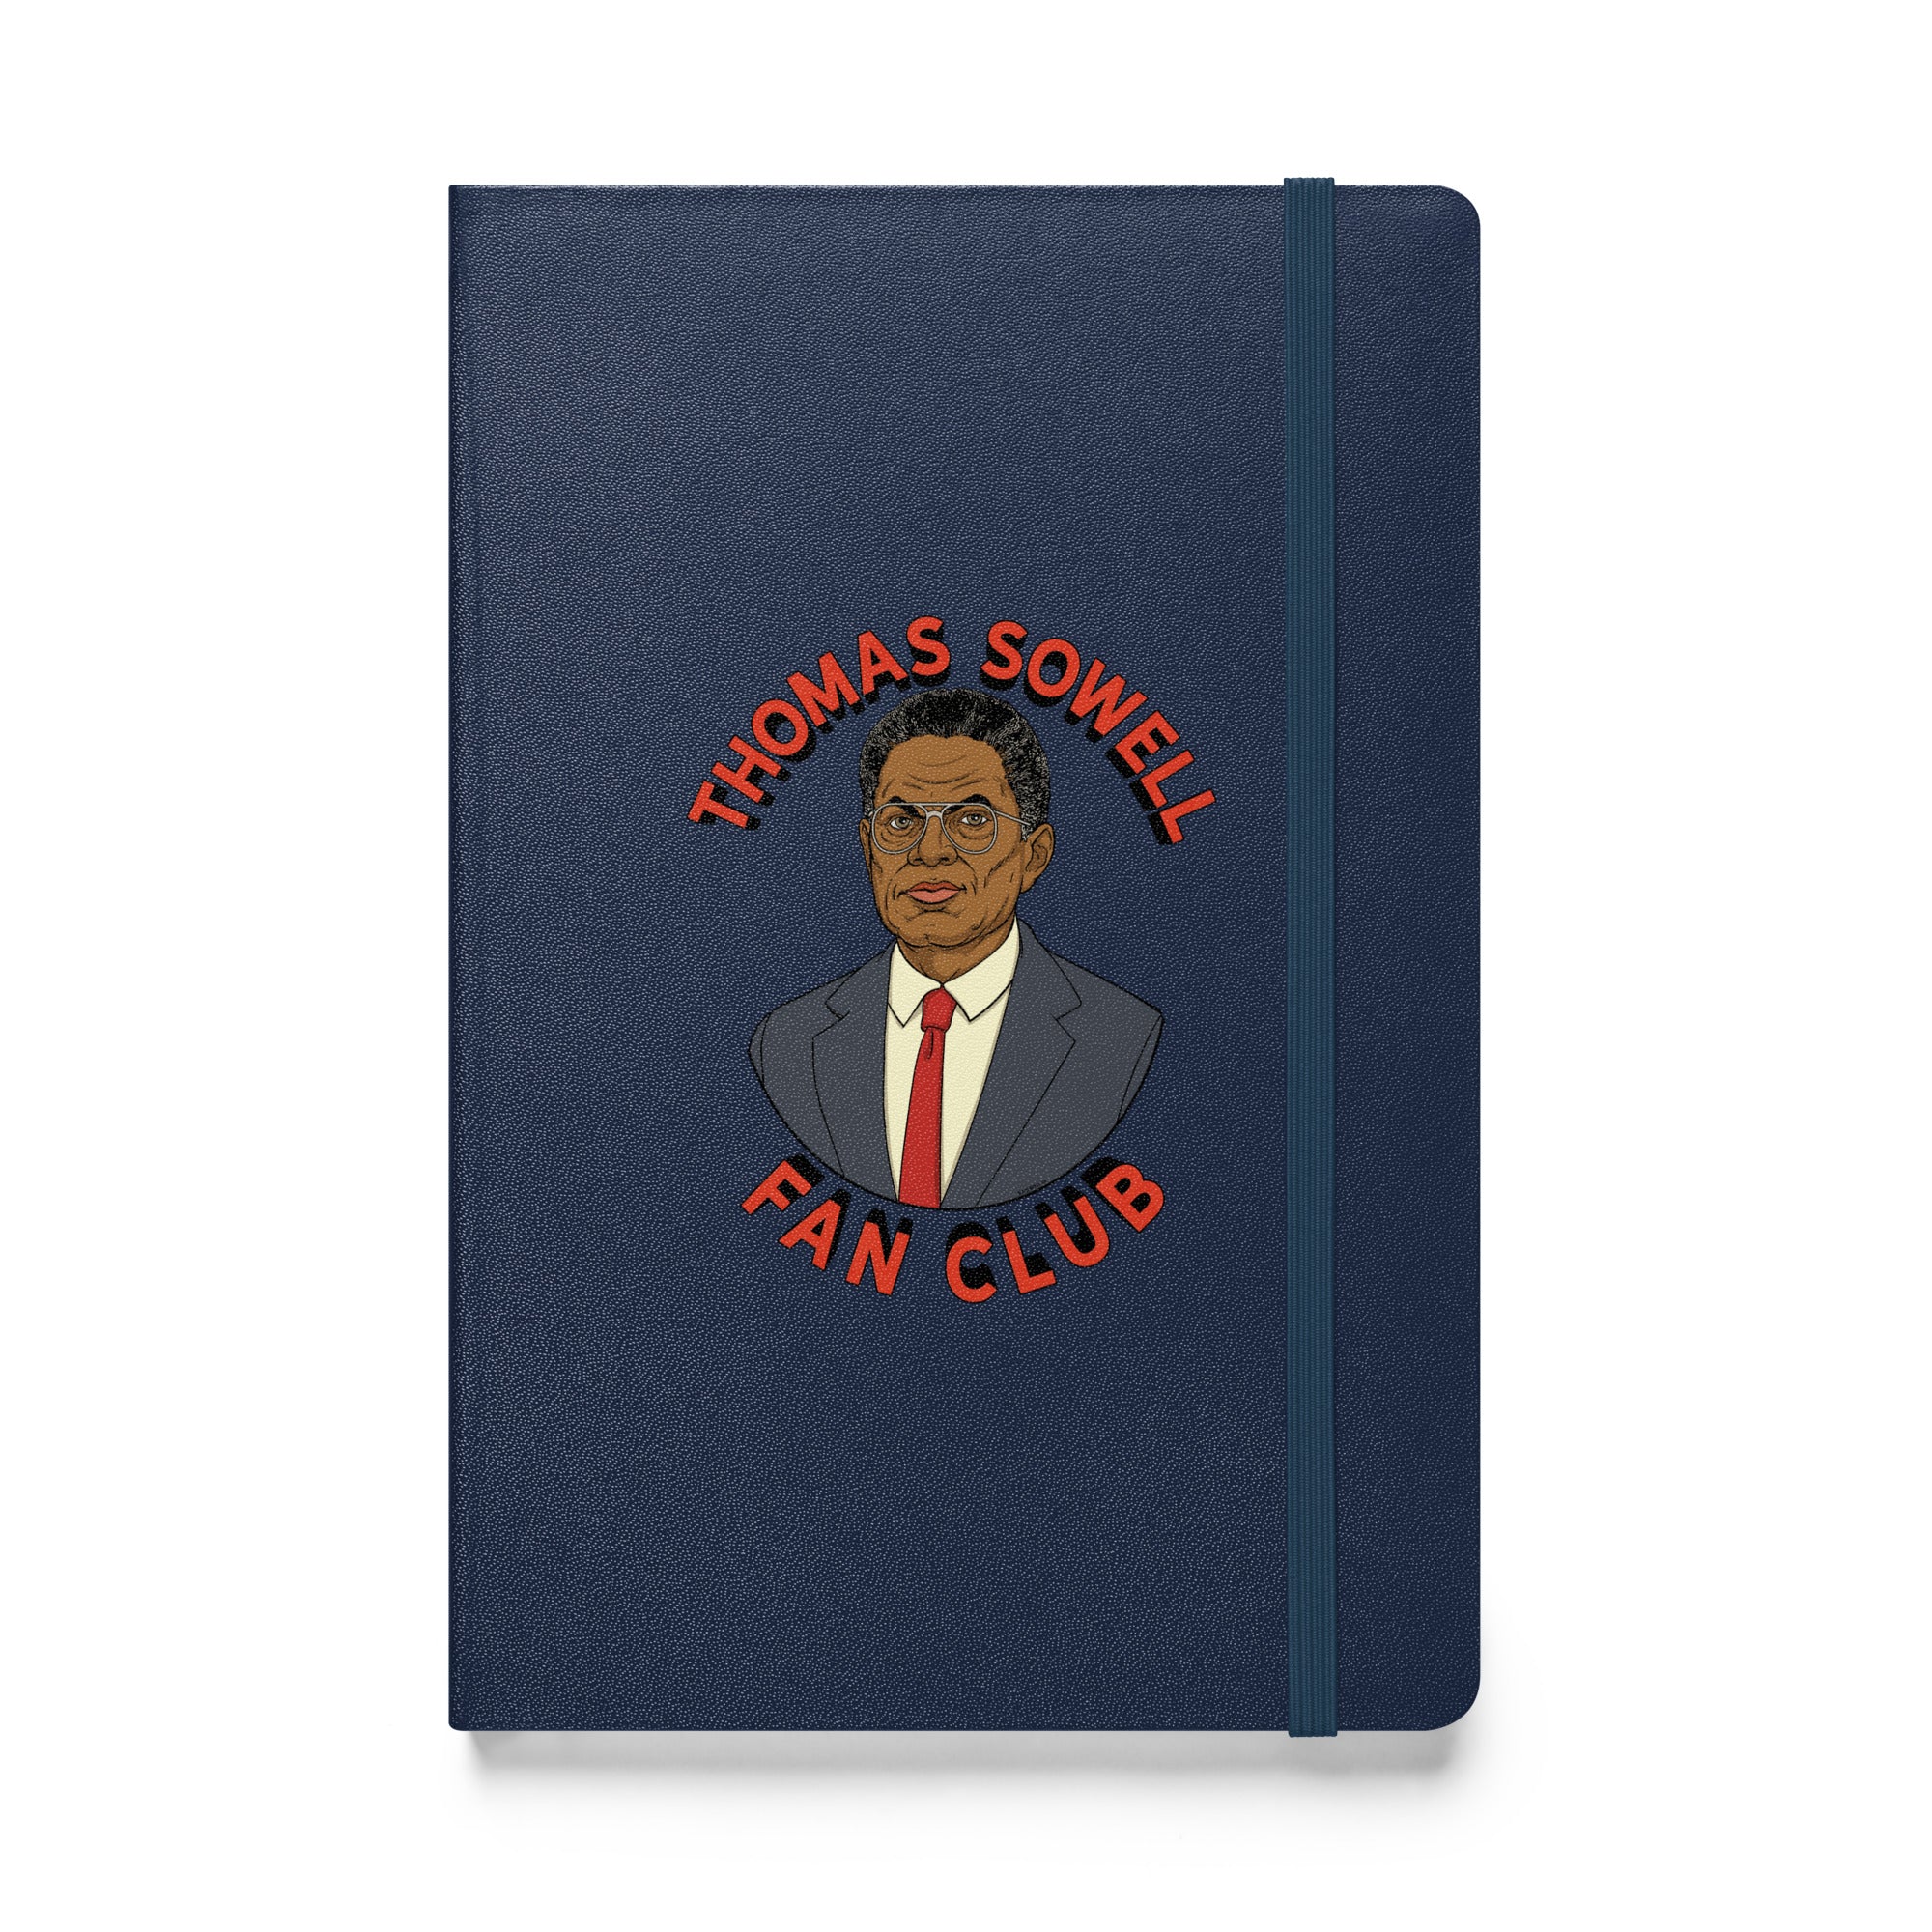 Thomas Sowell Fan Club Hardcover Bound Notebook